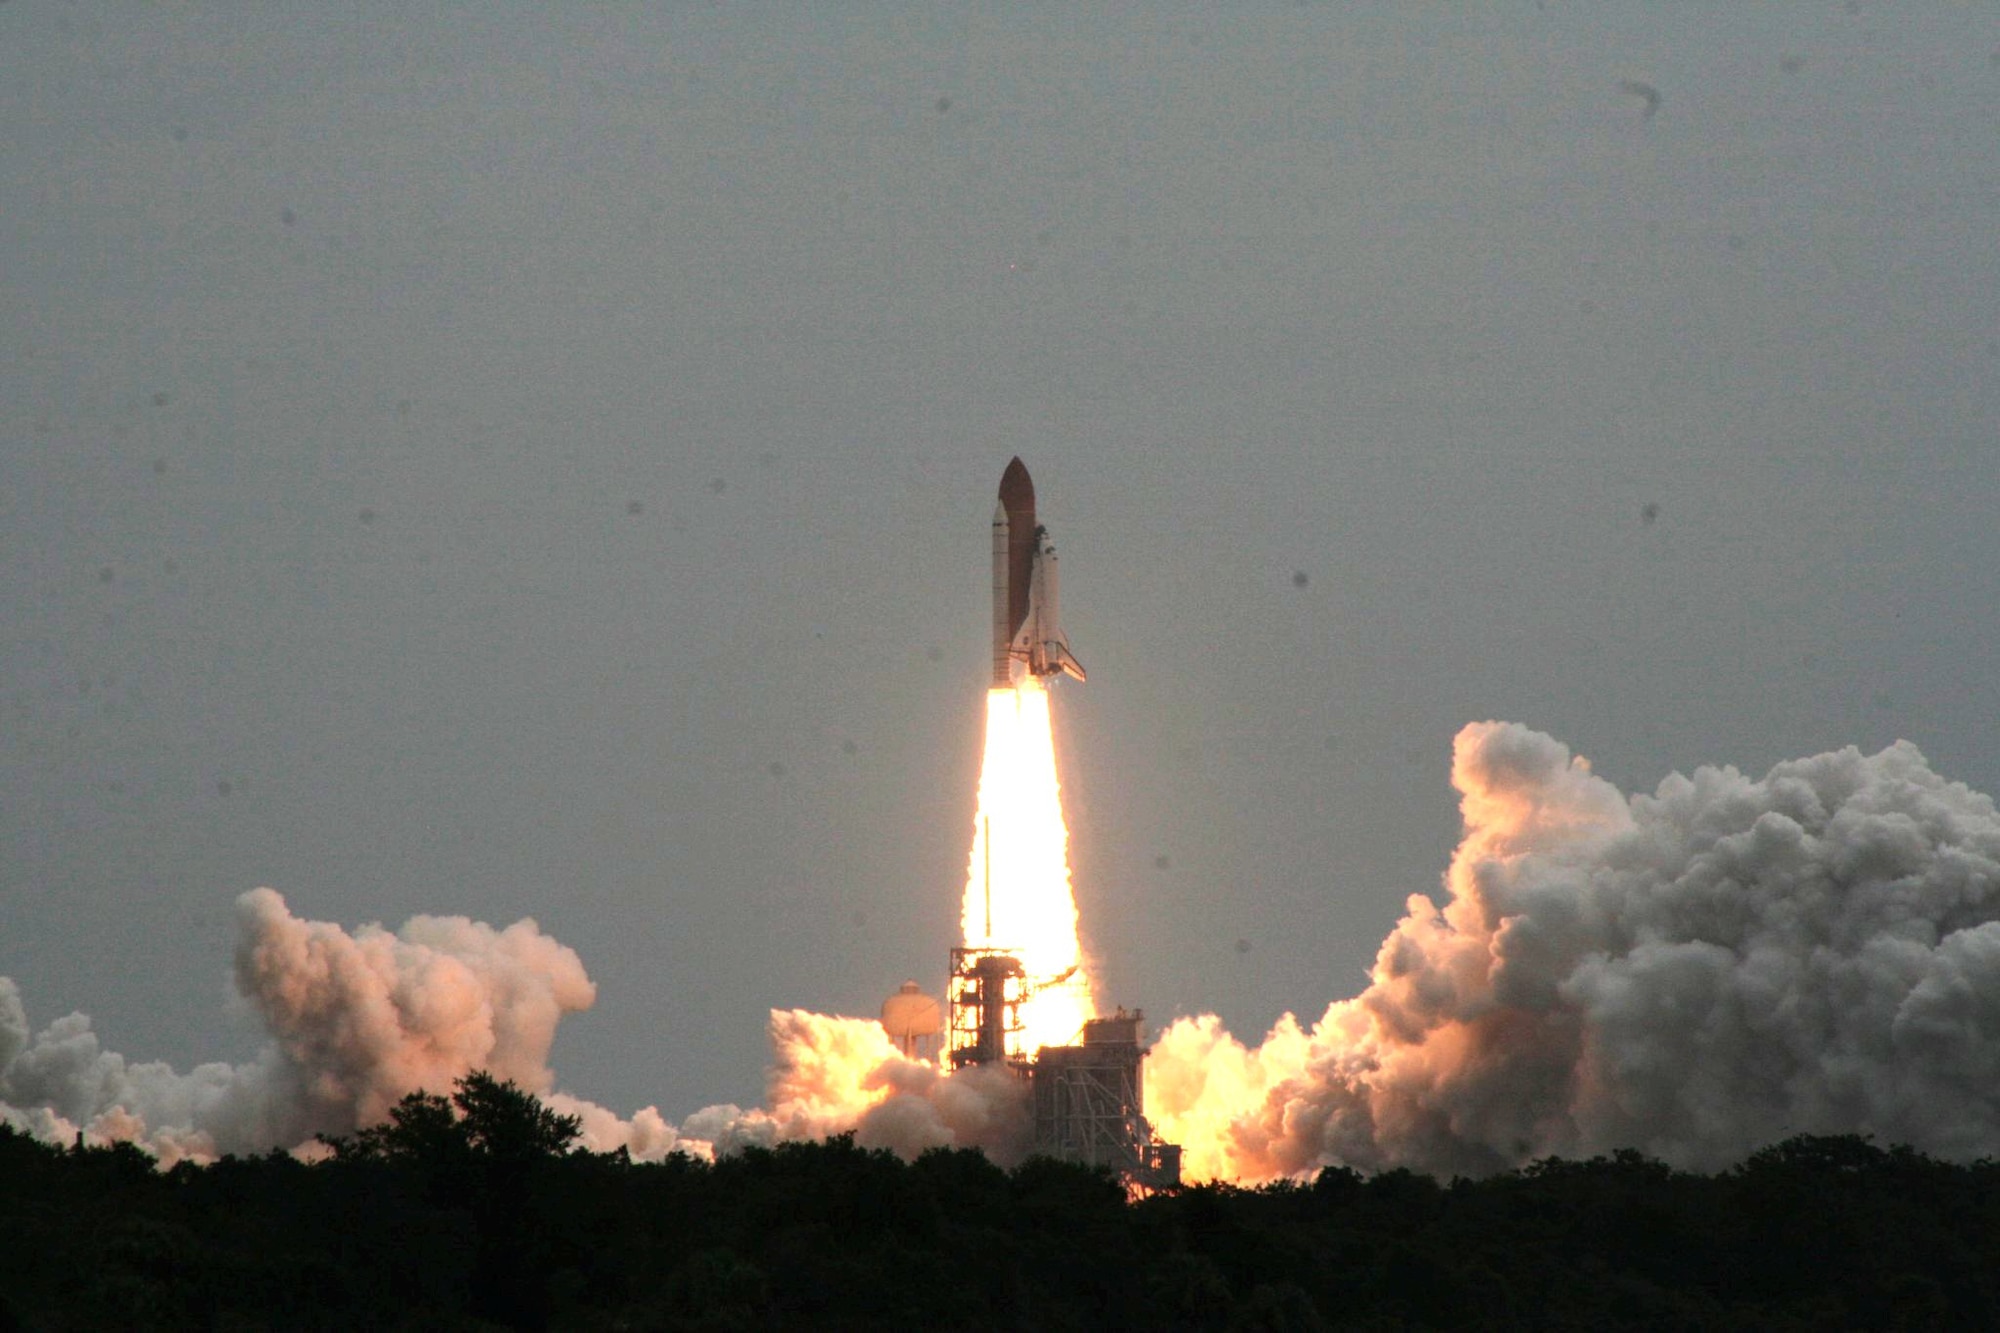 CAPE CANAVERAL AIR FORCE STATION, Fla. -- Liftoff of Space Shuttle Atlantis on its STS-135 mission, July 8 at 11:29 a.m. Eastern Daylight Time. This will be the 33rd and final voyage into space for Atlantis. (Air Force photo by/Army Lt. Col. Michael Humphreys)